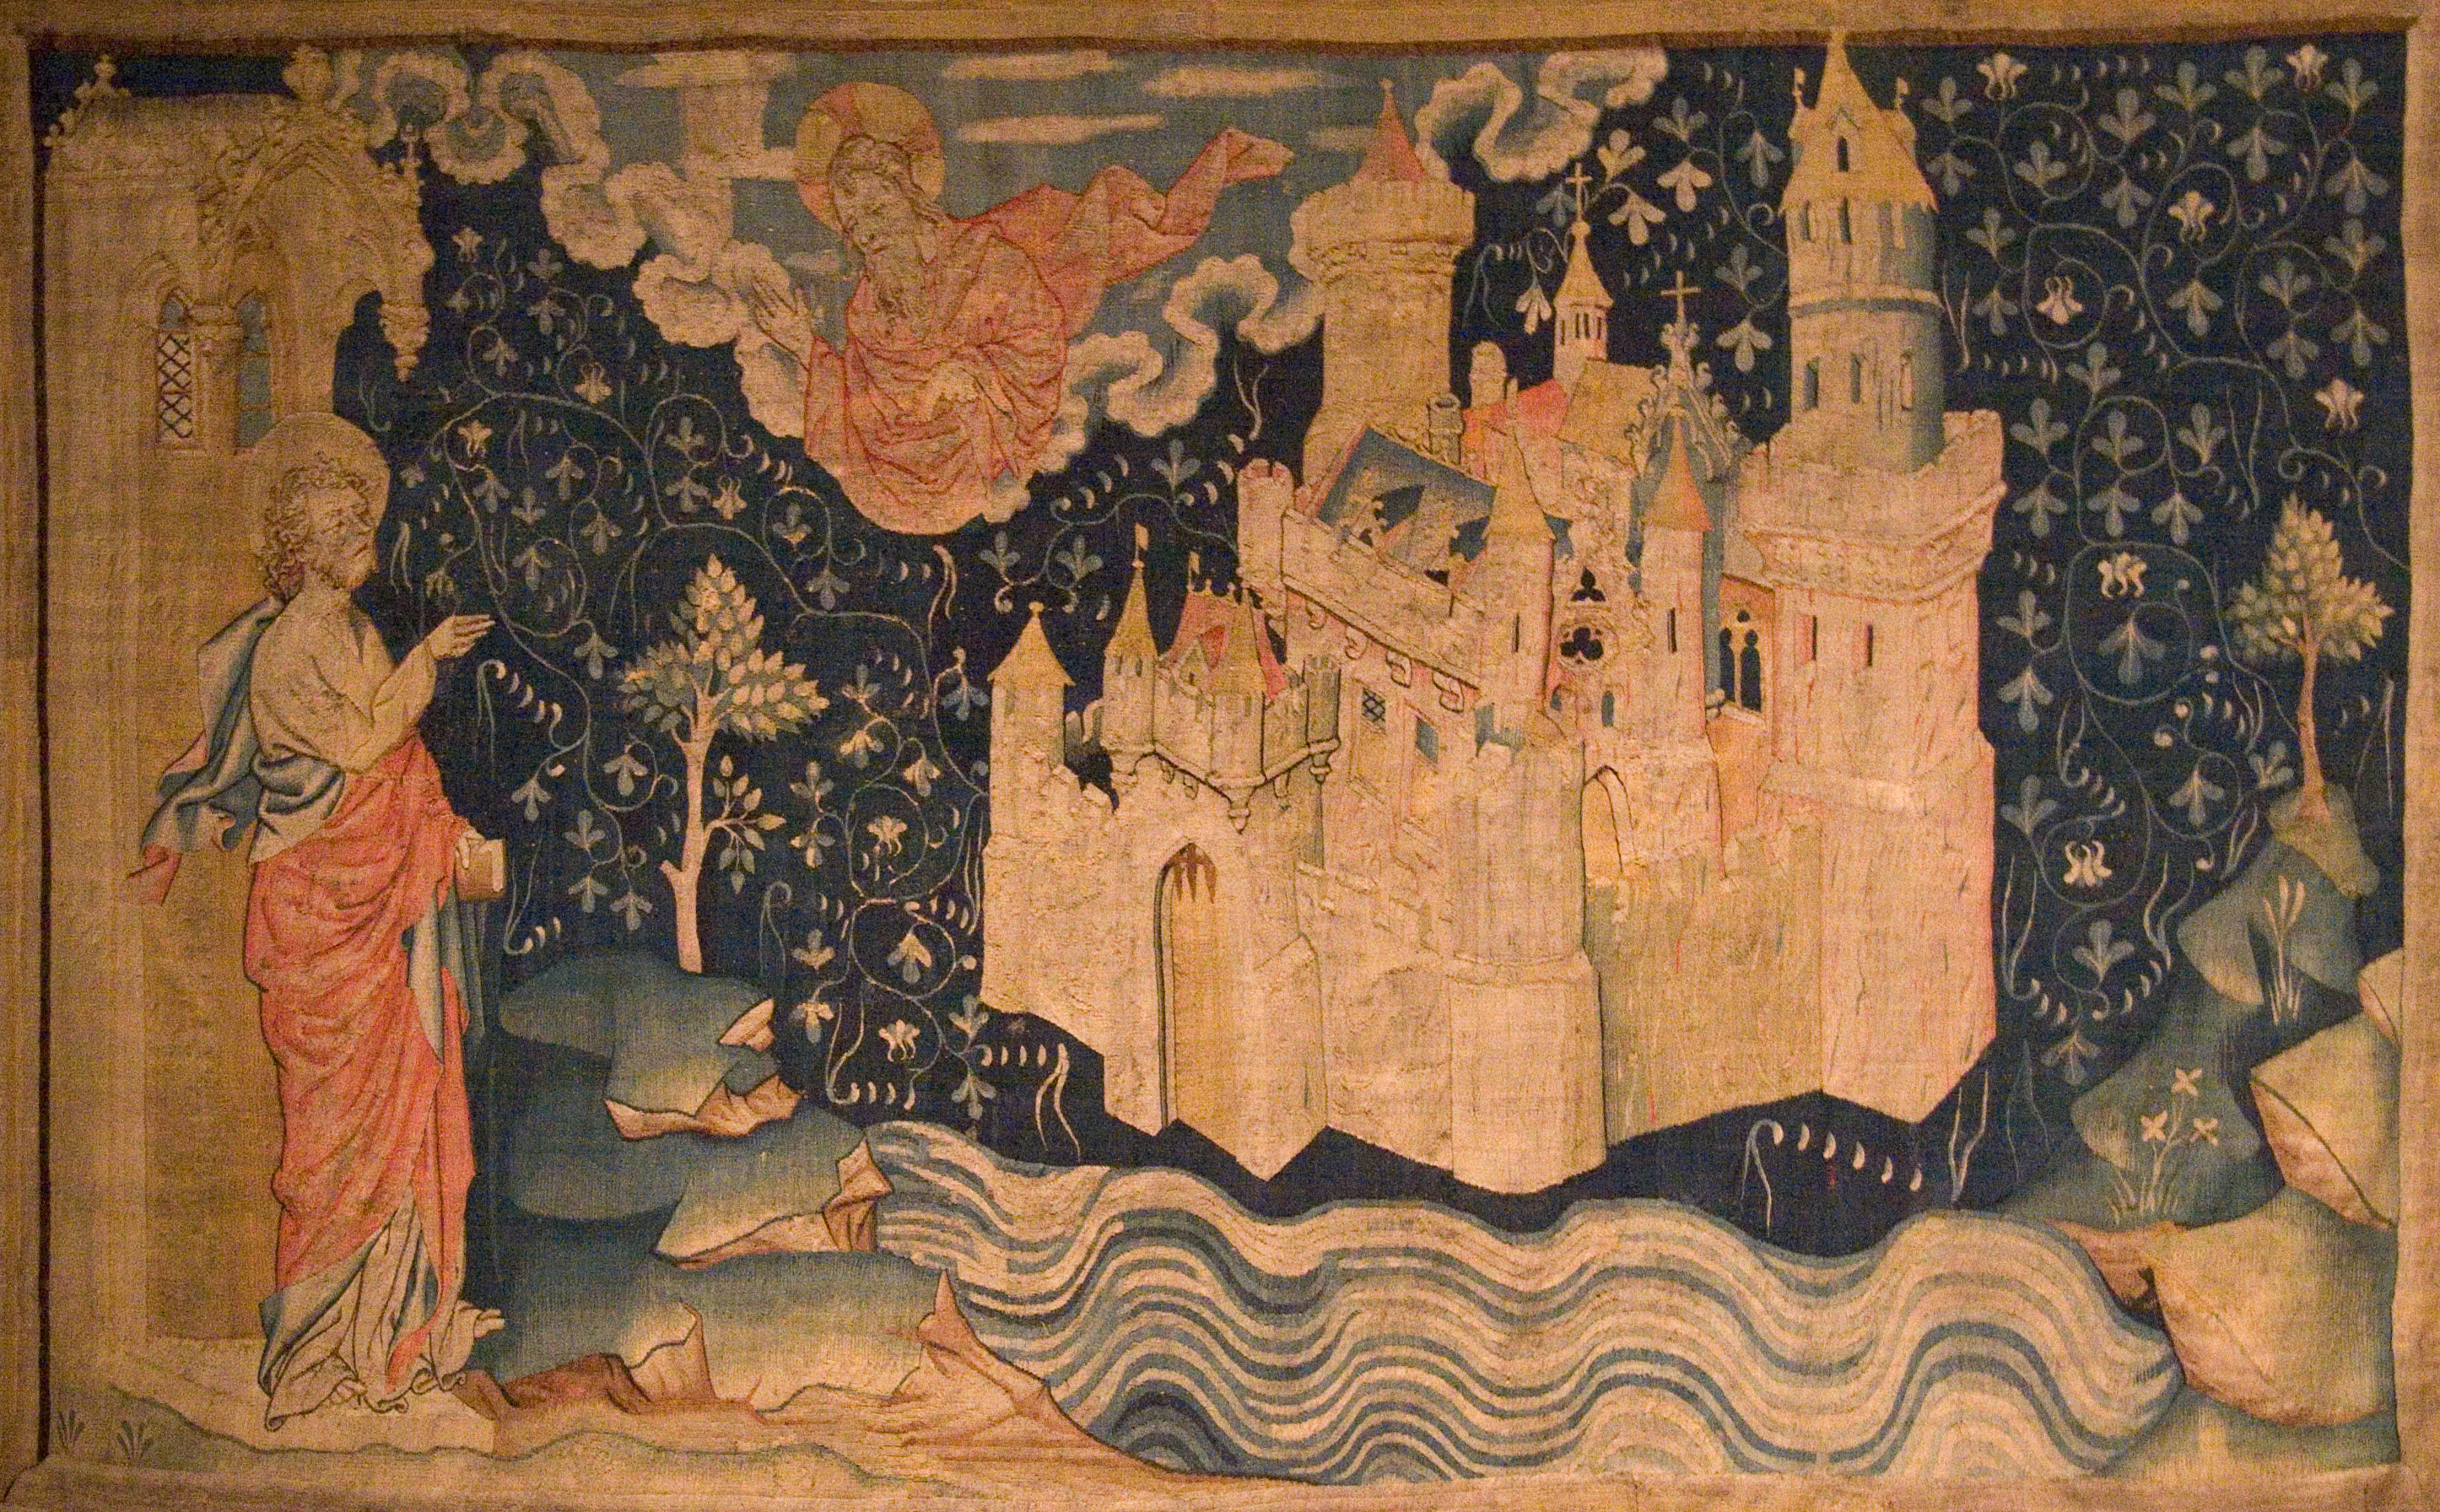 John of Patmos watches the descent of the New Jerusalem from God in a 14th-century tapestry.